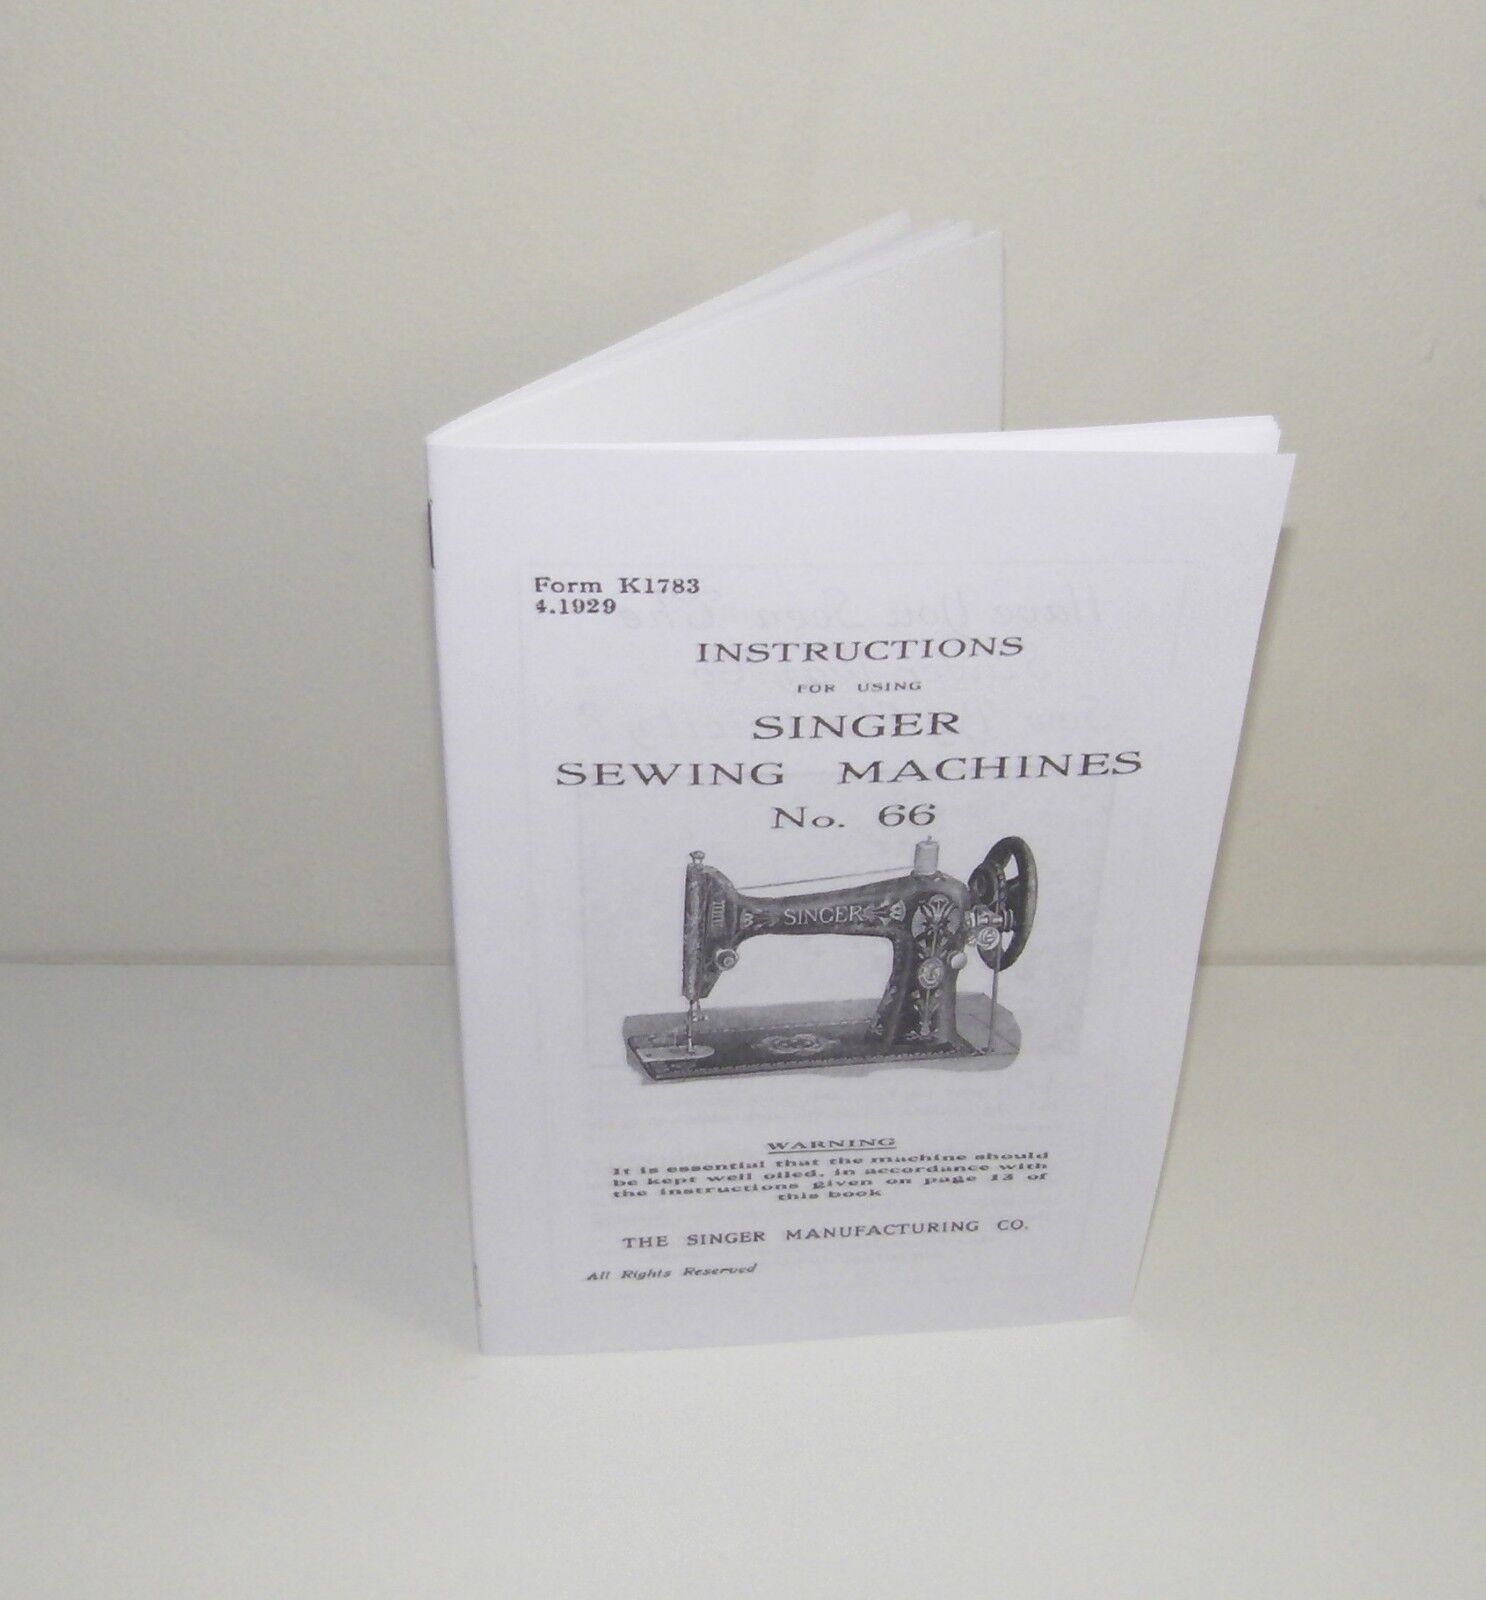 Singer 66 Sewing Machine  Instruction  Reproduction also Attachment Instructions